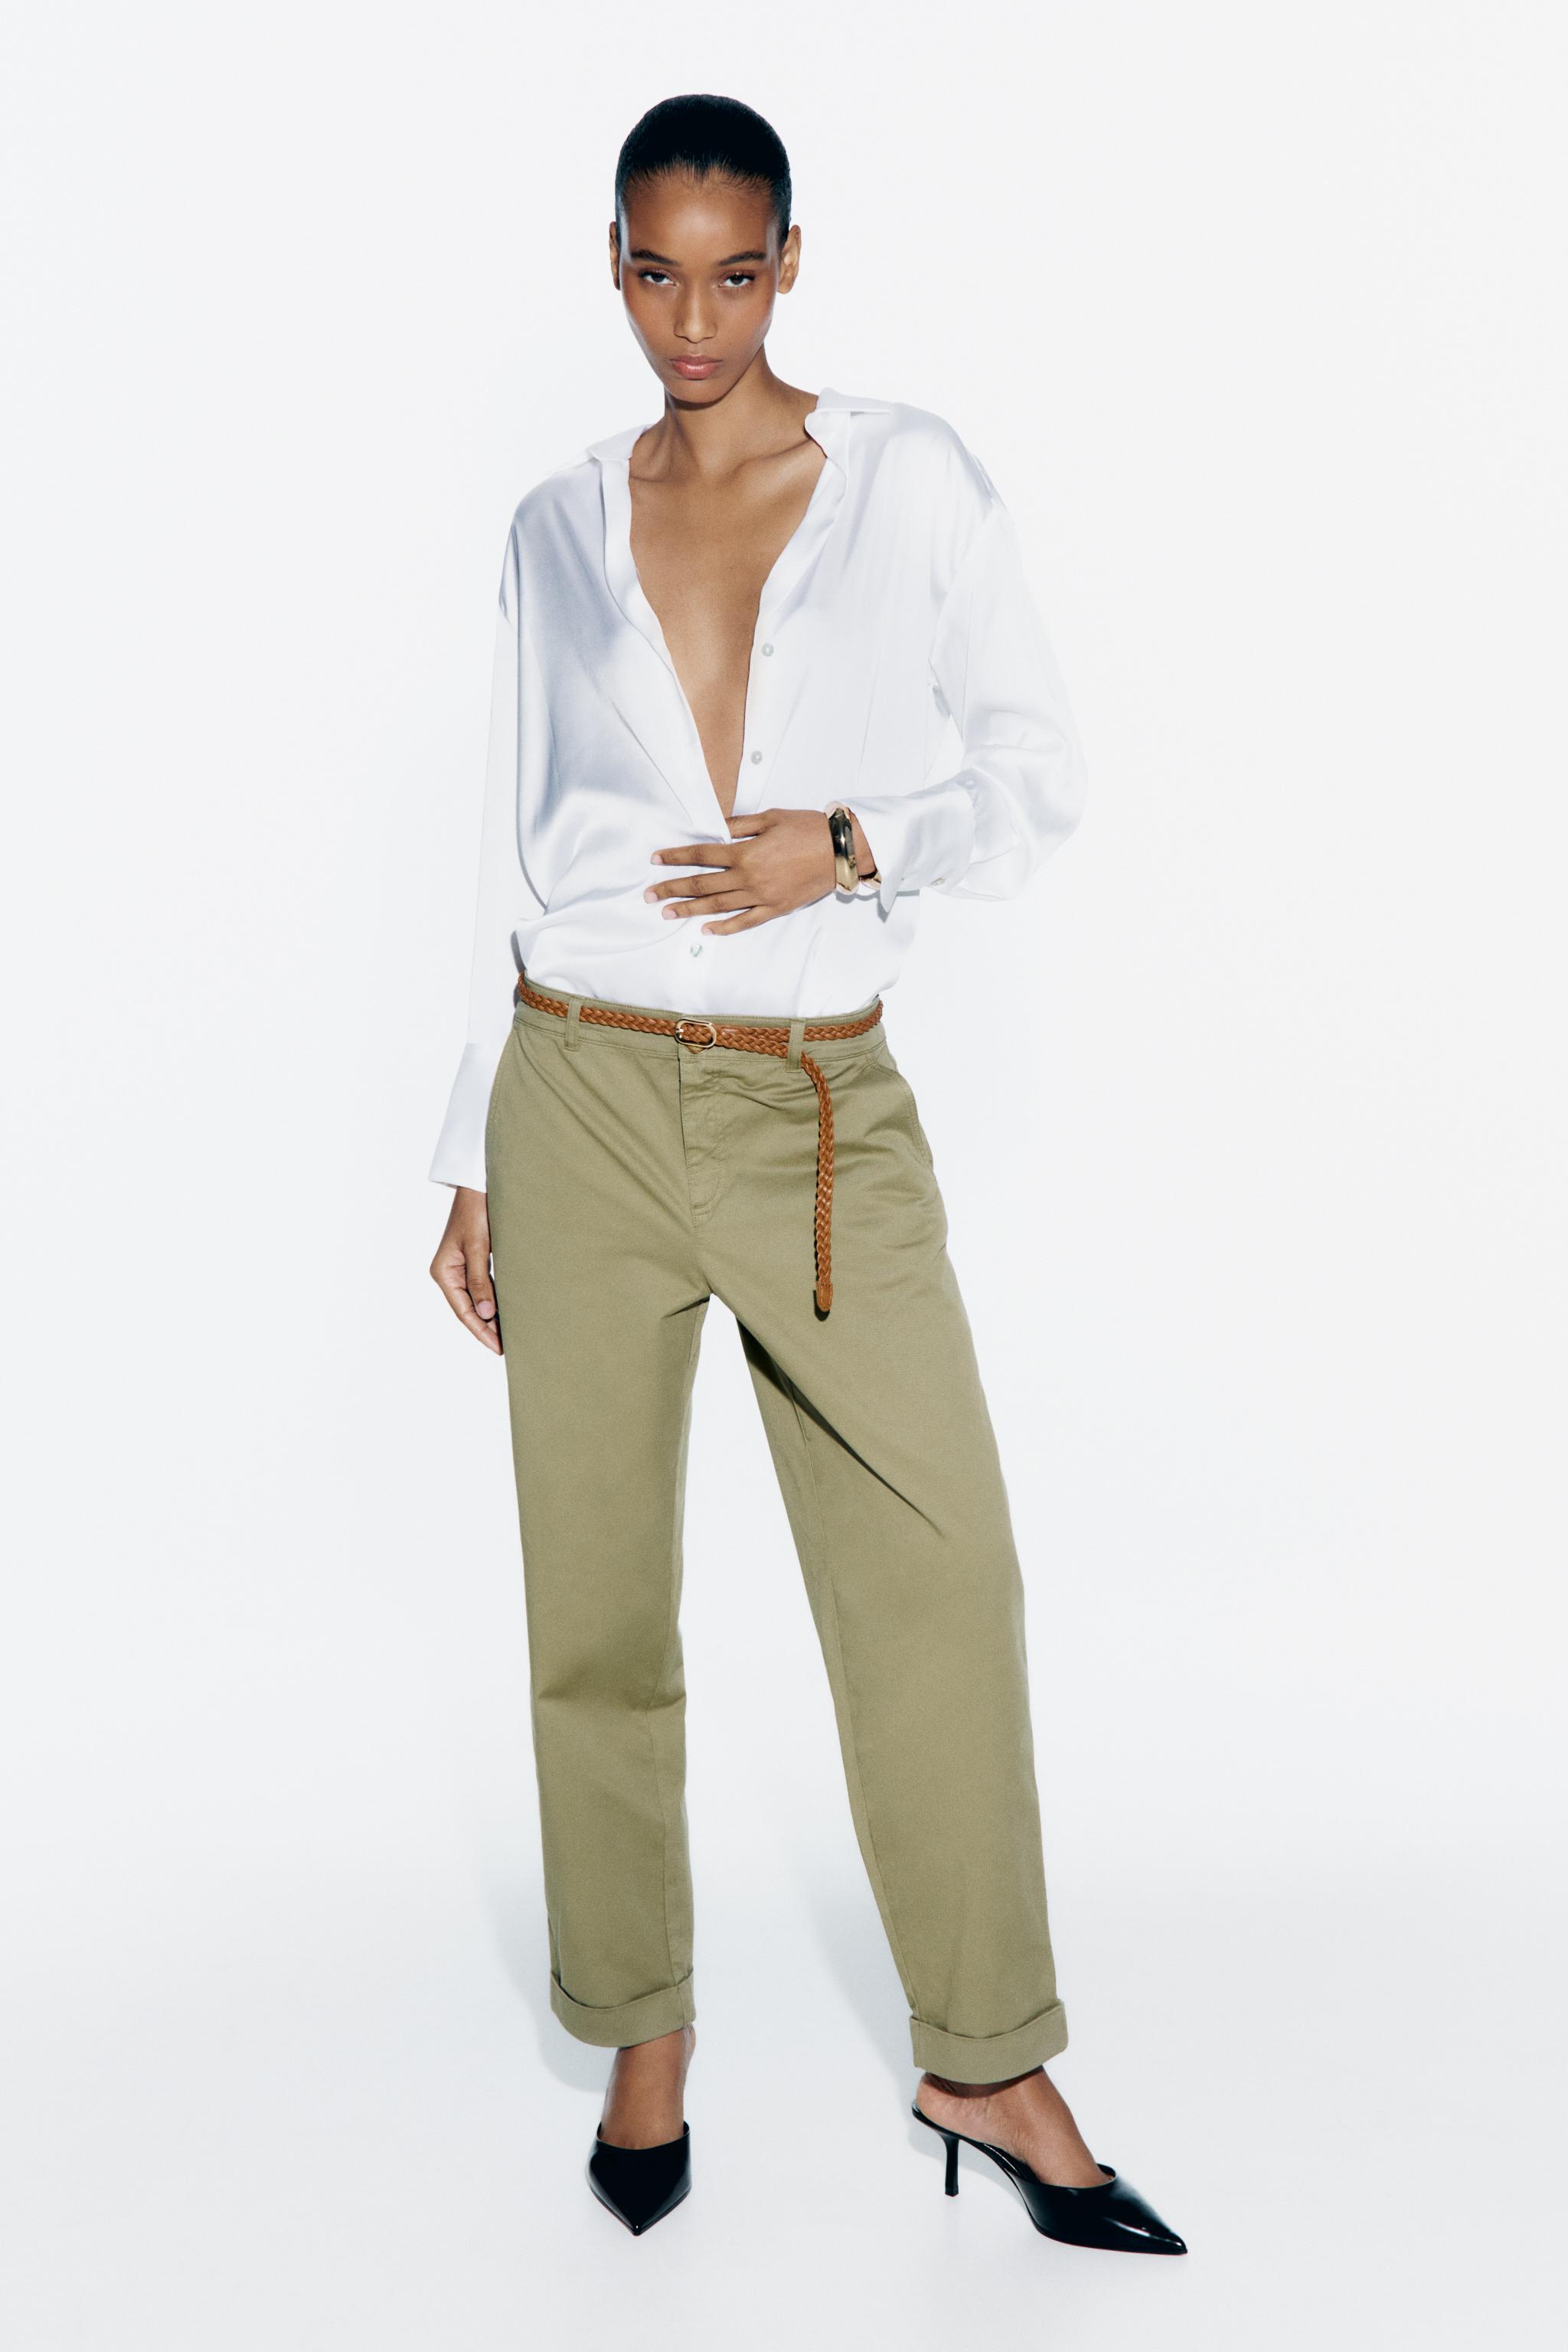 Zara high waisted belted pants  Belted pants, Fashion pants, Tops for  leggings